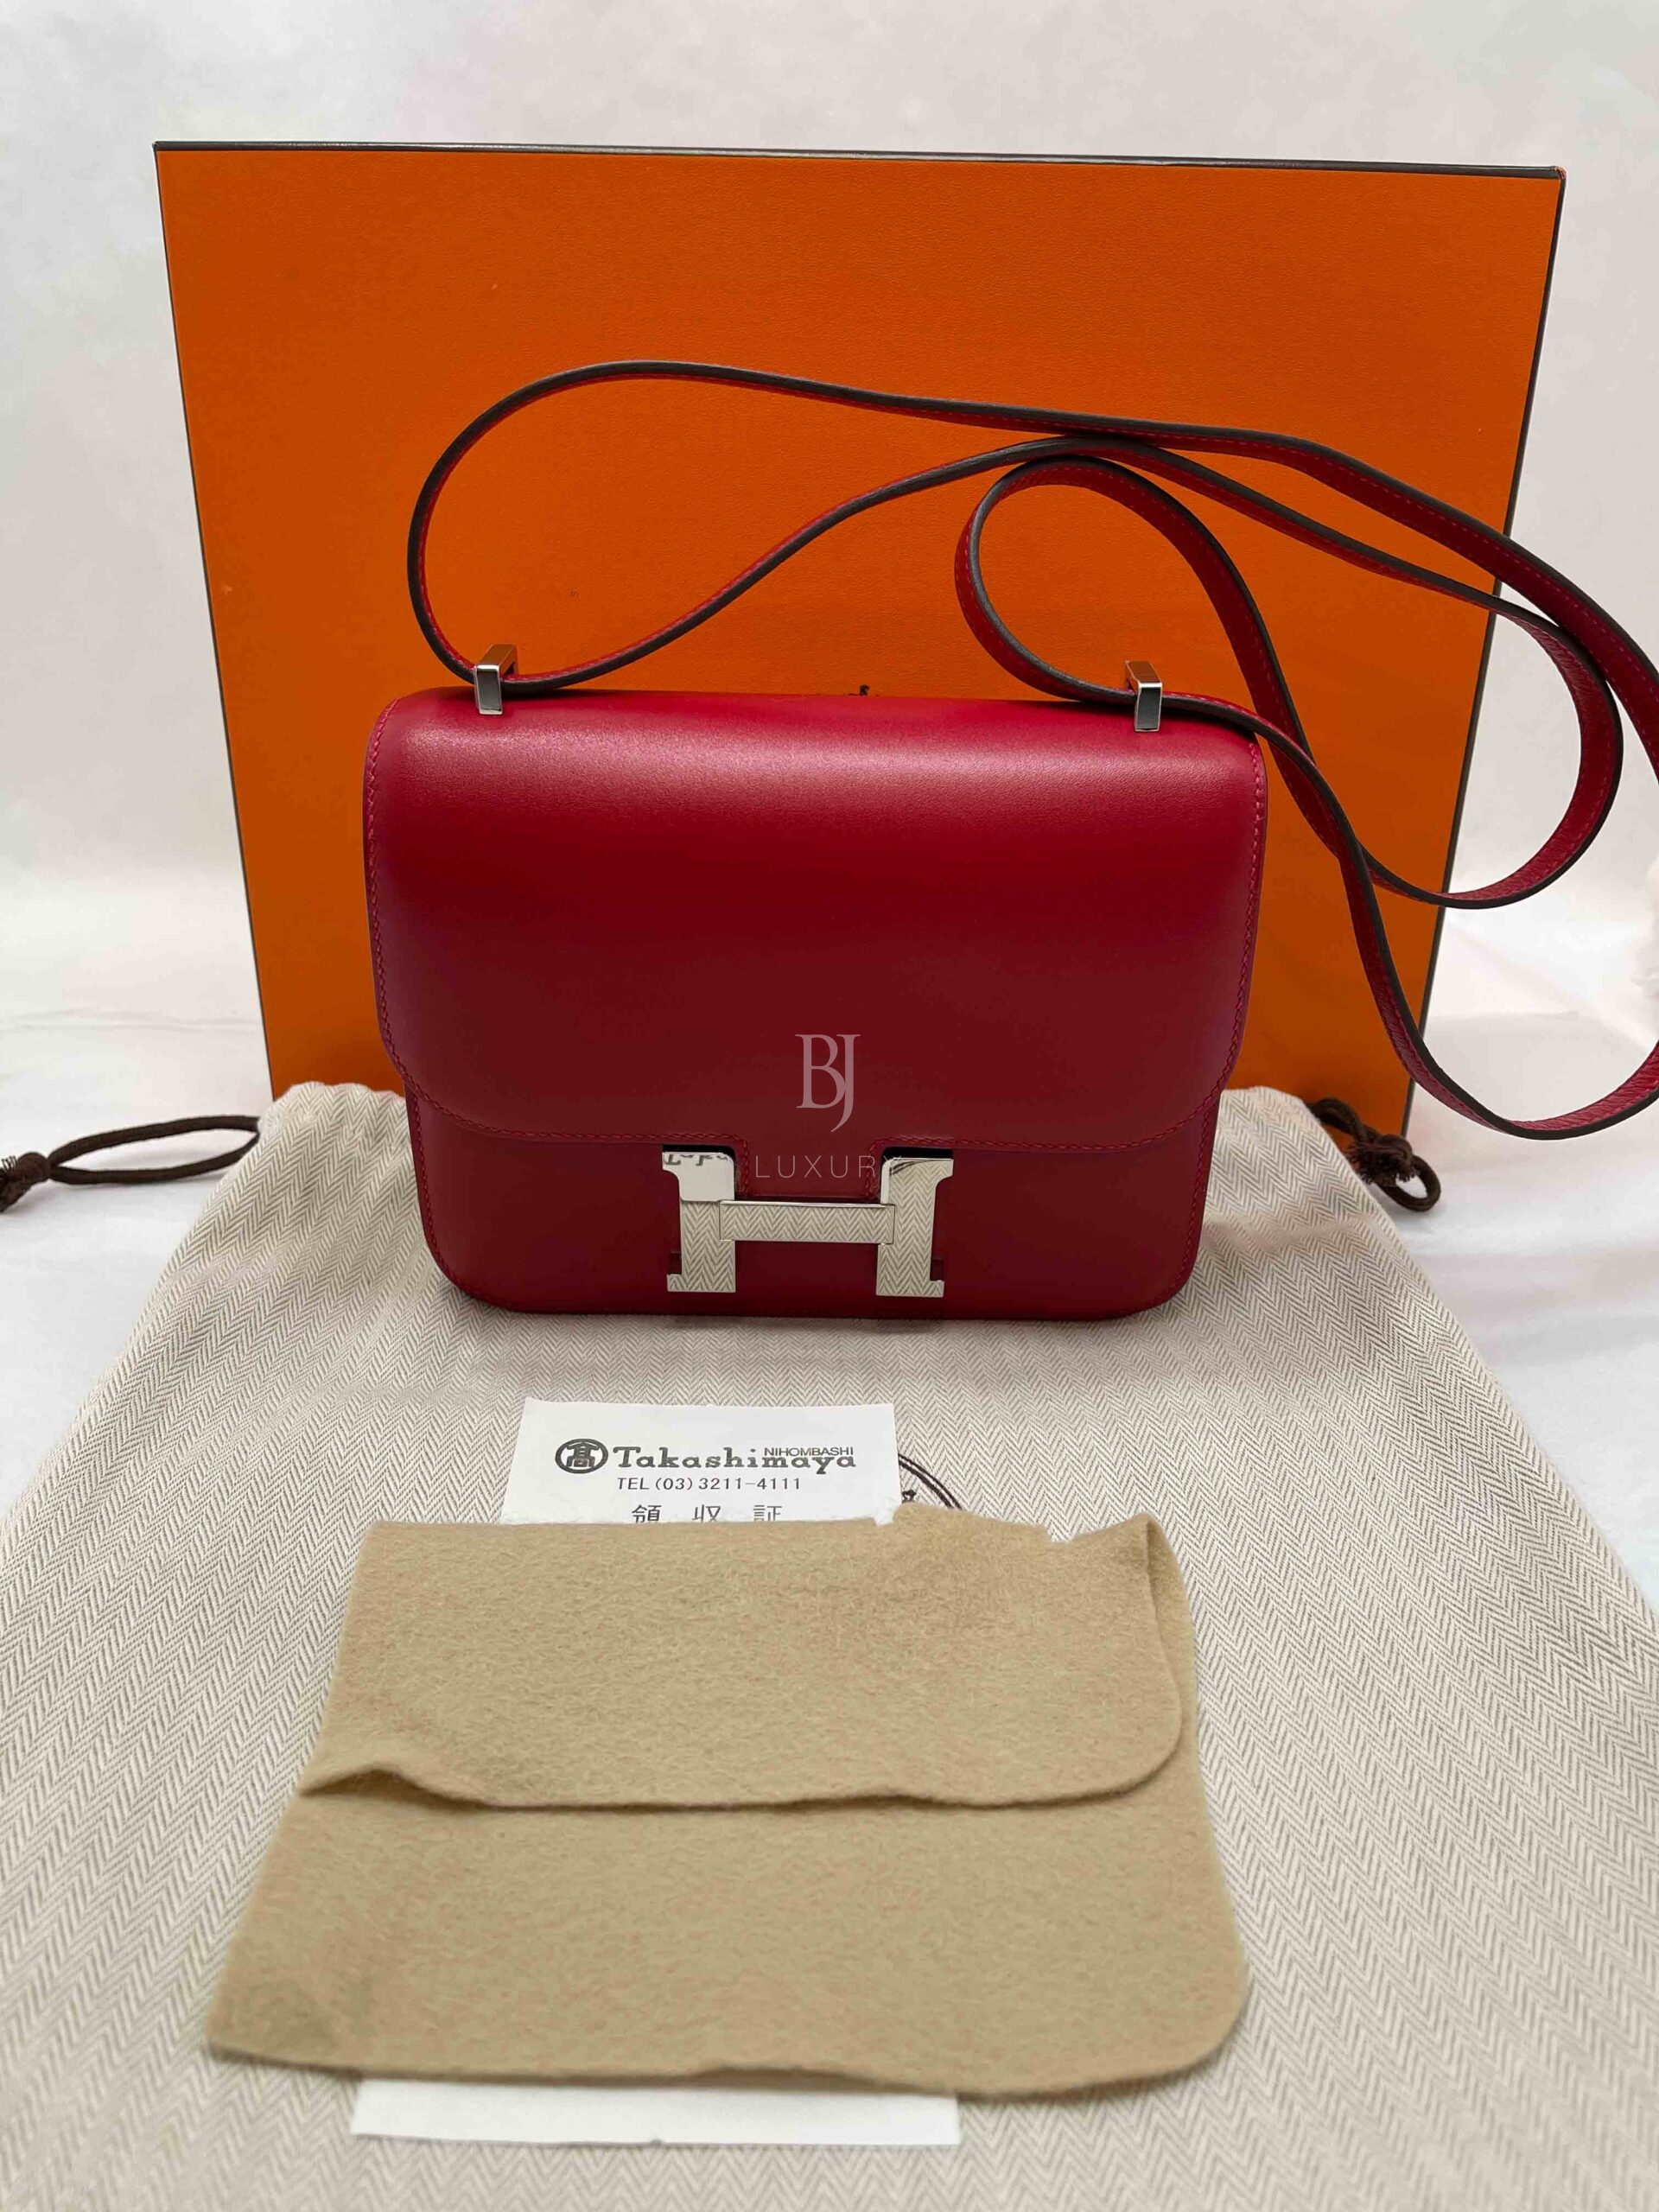 HERMES-CONSTANCE-18-ROUGECASAQUE-BOXCALF-Photo 3-9-22, 12 56 50 PM.jpg